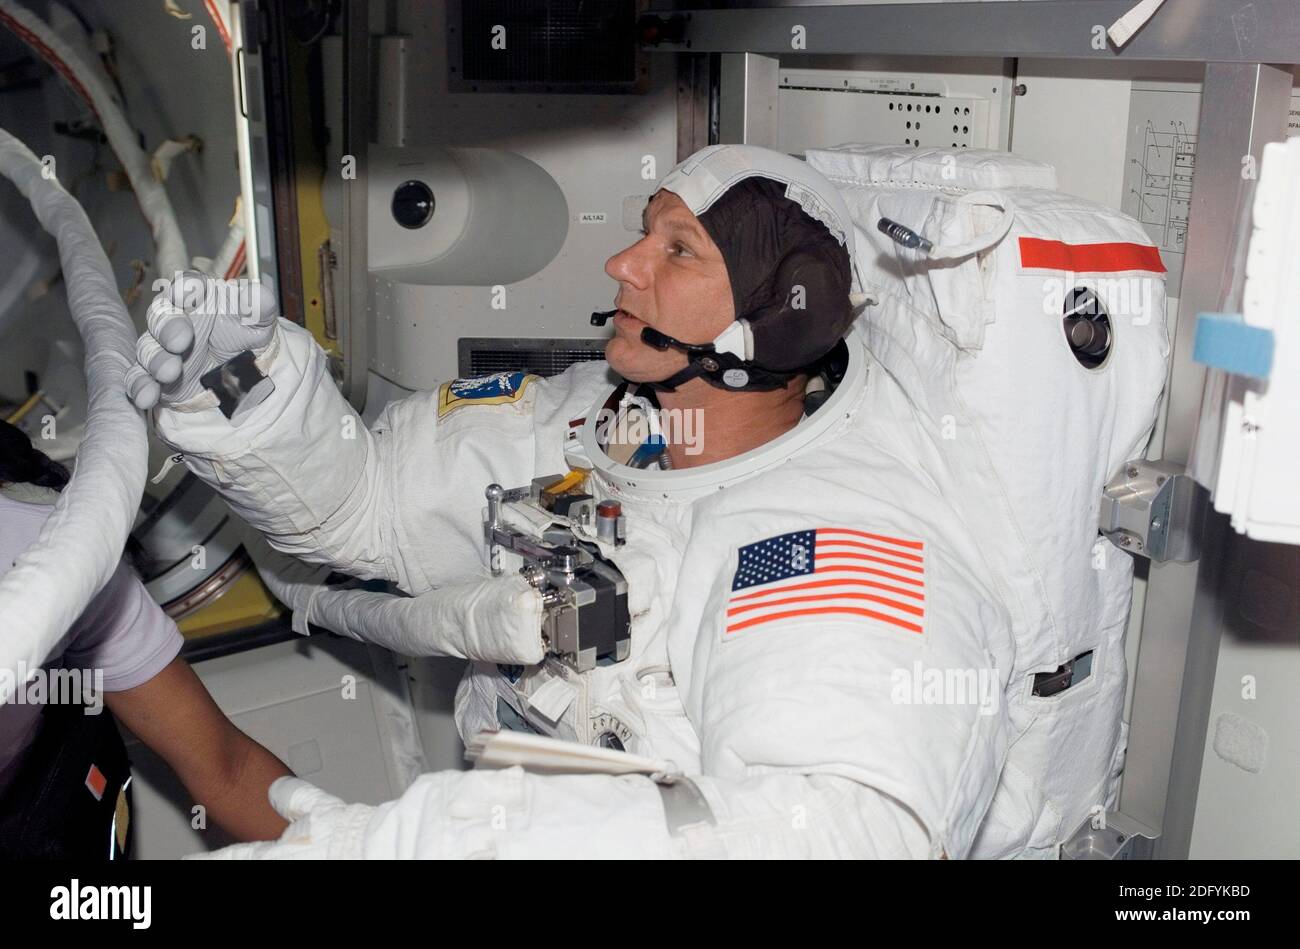 ISS - 08 July 2006 - Astronaut Piers J Sellers, STS-121 mission specialist, attired in his Extravehicular Mobility Unit (EMU) spacesuit, prepares for Stock Photo